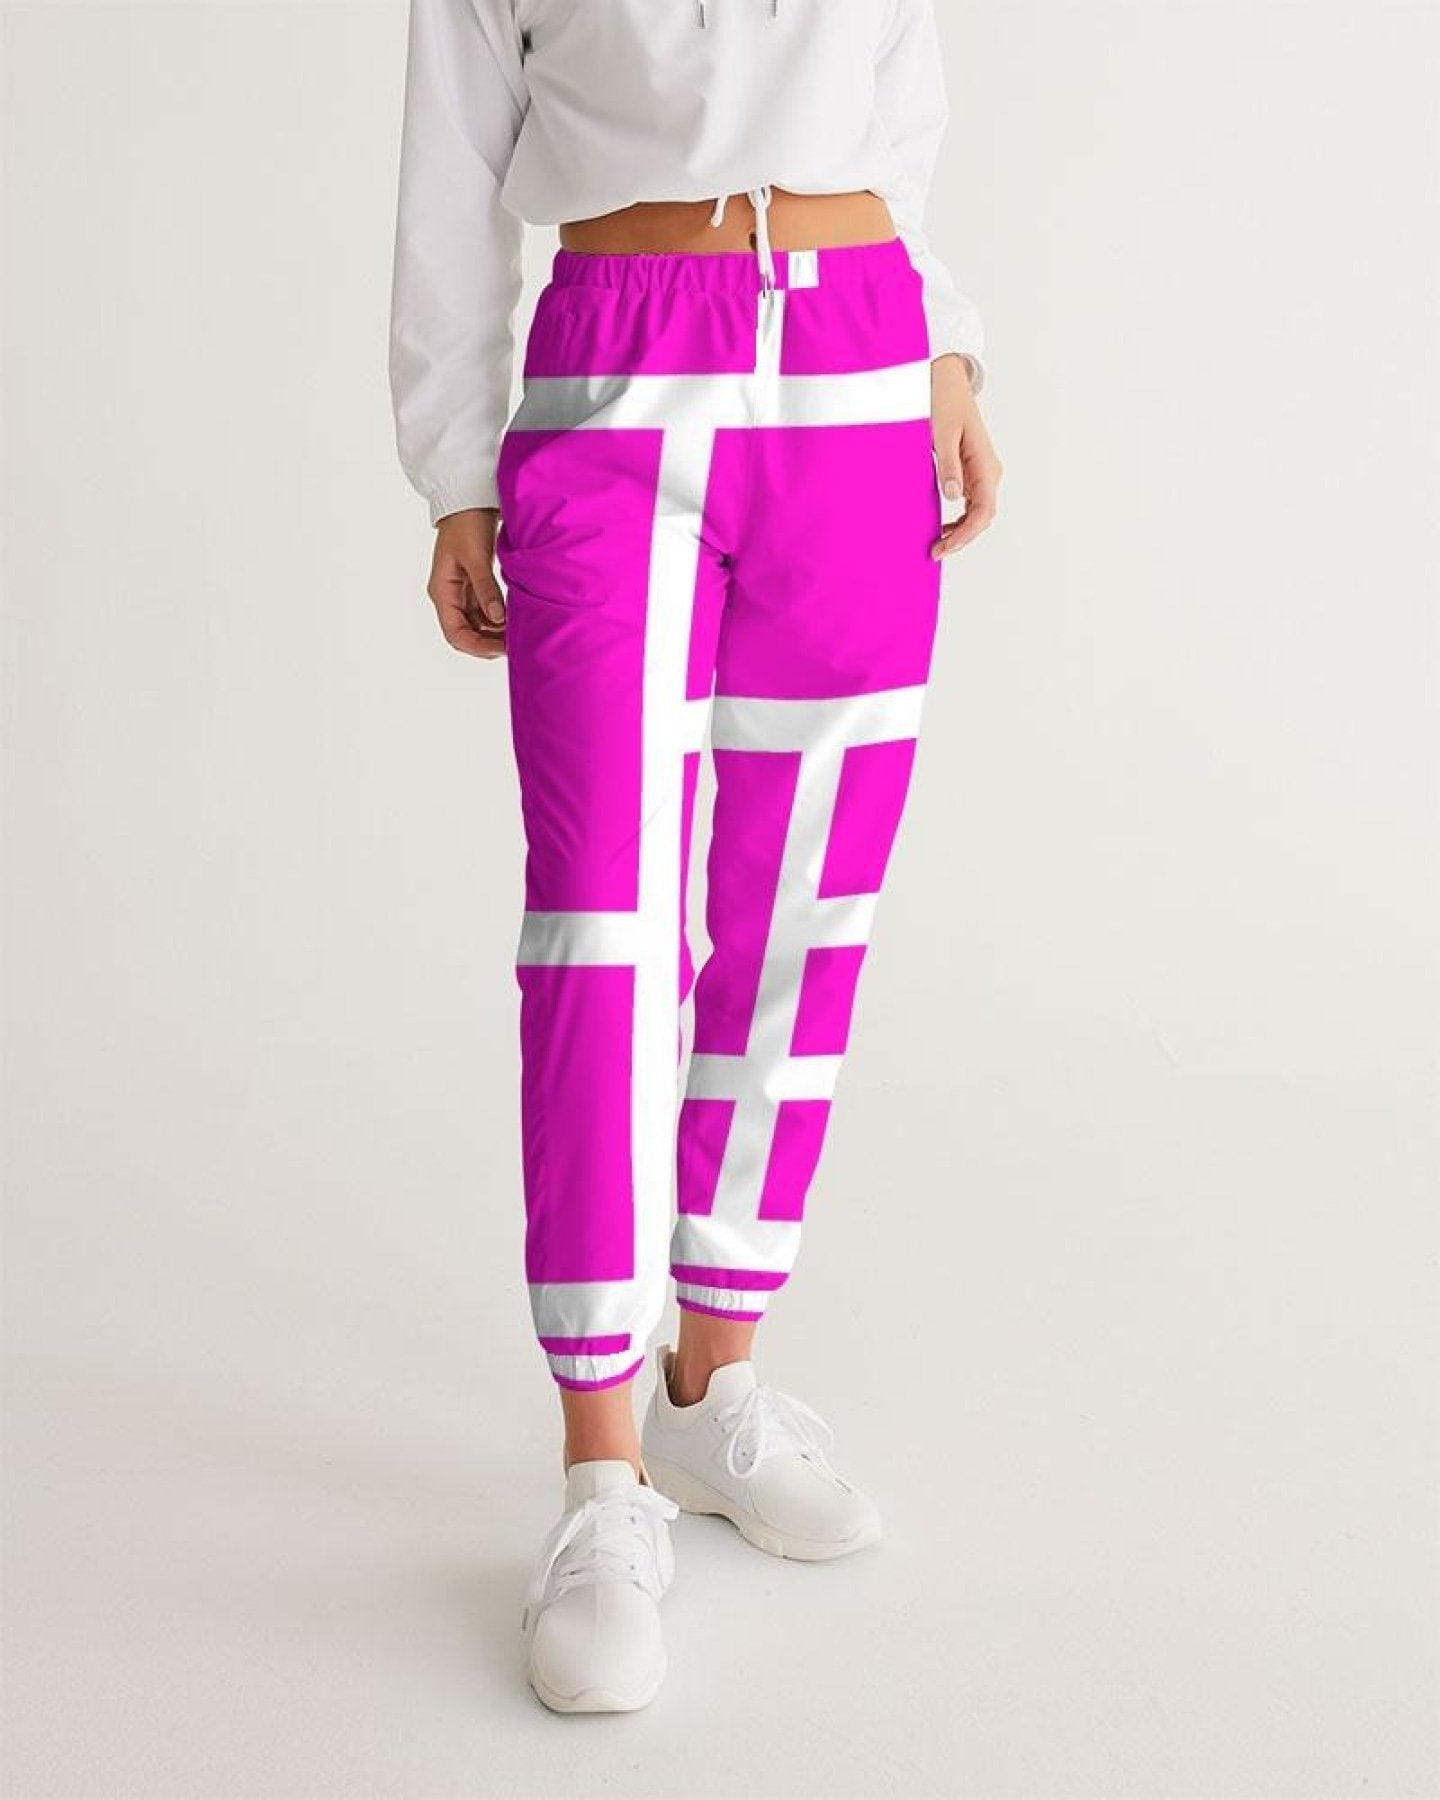 Pink Track Pants' - Track pants in the color pink, providing a stylish and comfortable option for your athletic or casual attire.